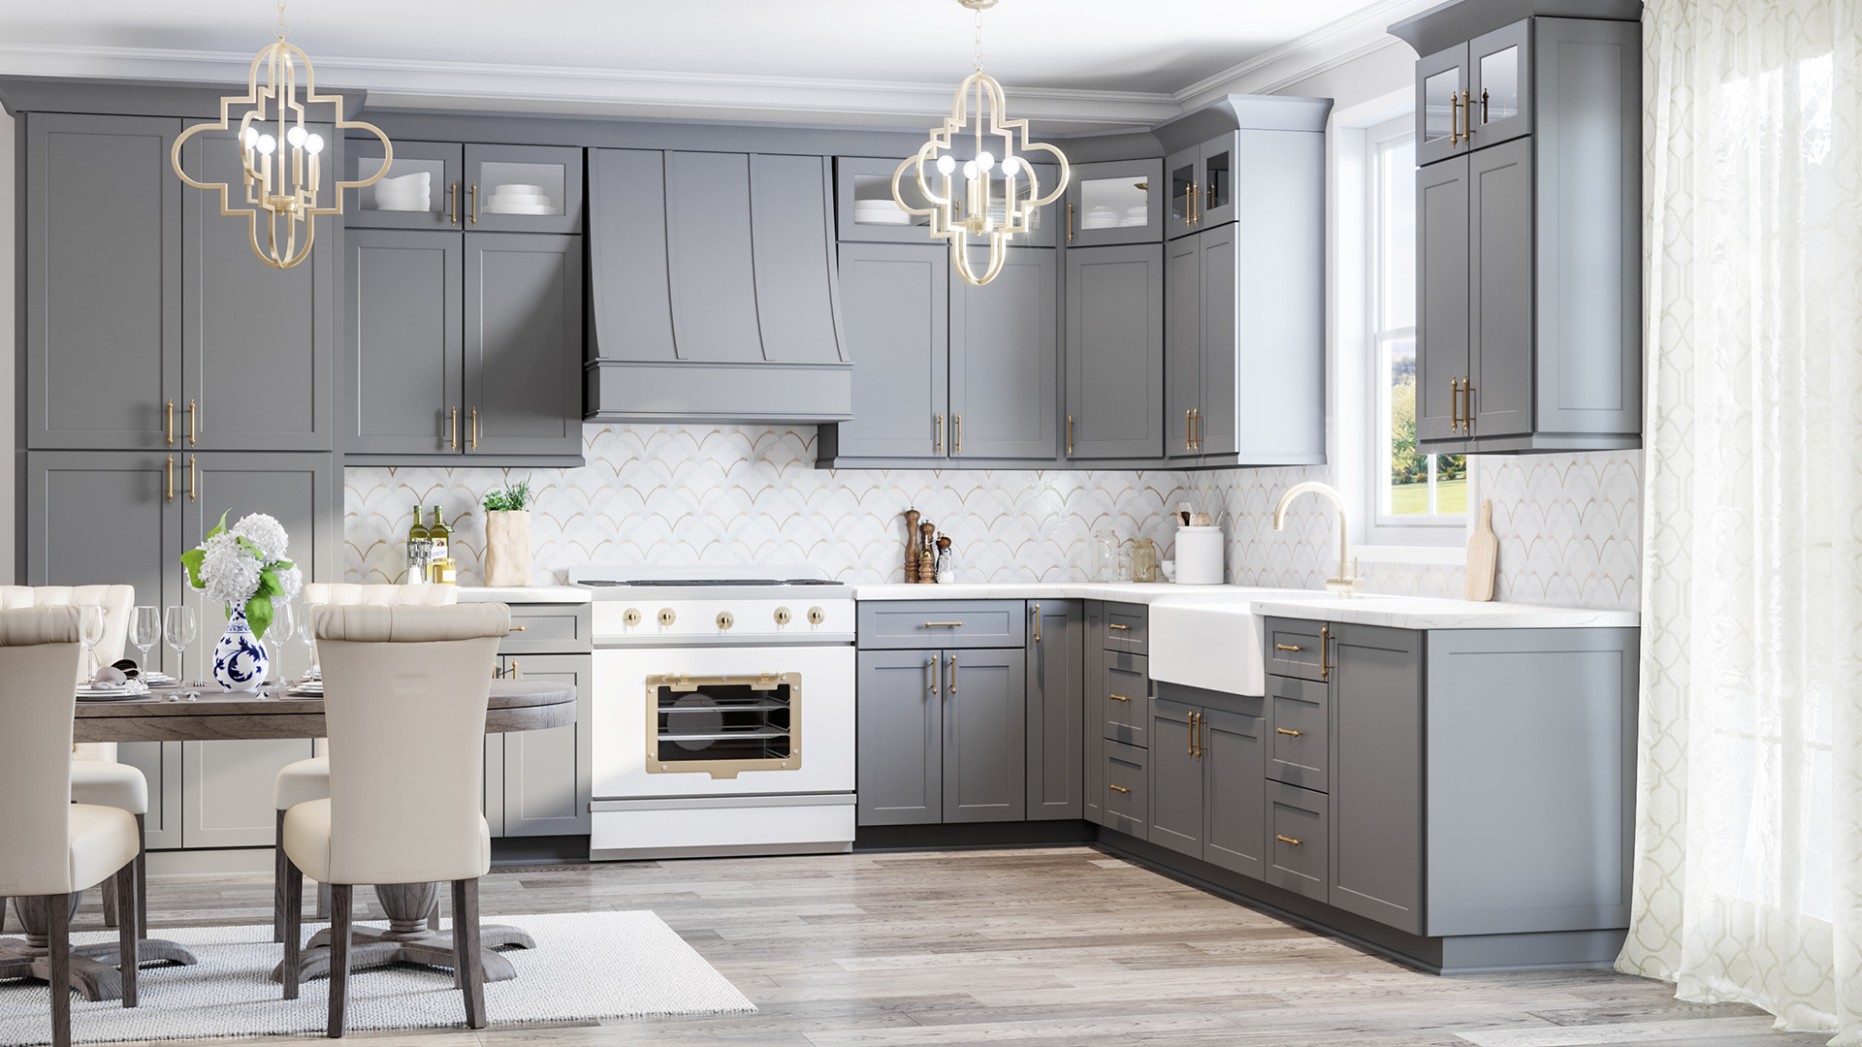 10 Kitchen Cabinet Trends for the Summer of 10  CabinetCorp - what is the latest trend in kitchen cabinets?